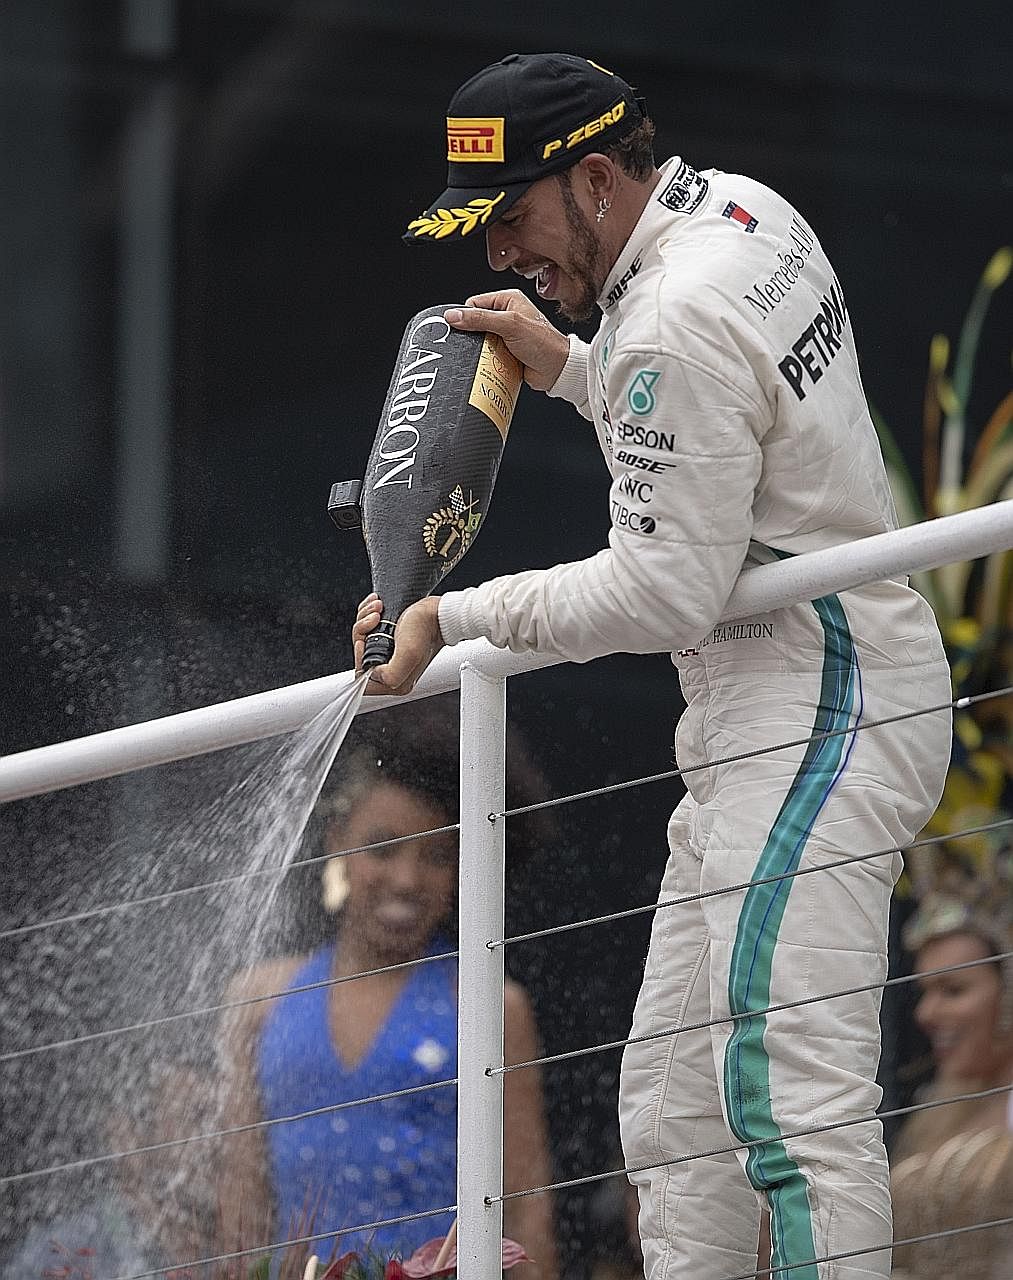 Mercedes driver Lewis Hamilton has backtracked on his comments but they have gone viral on social media.